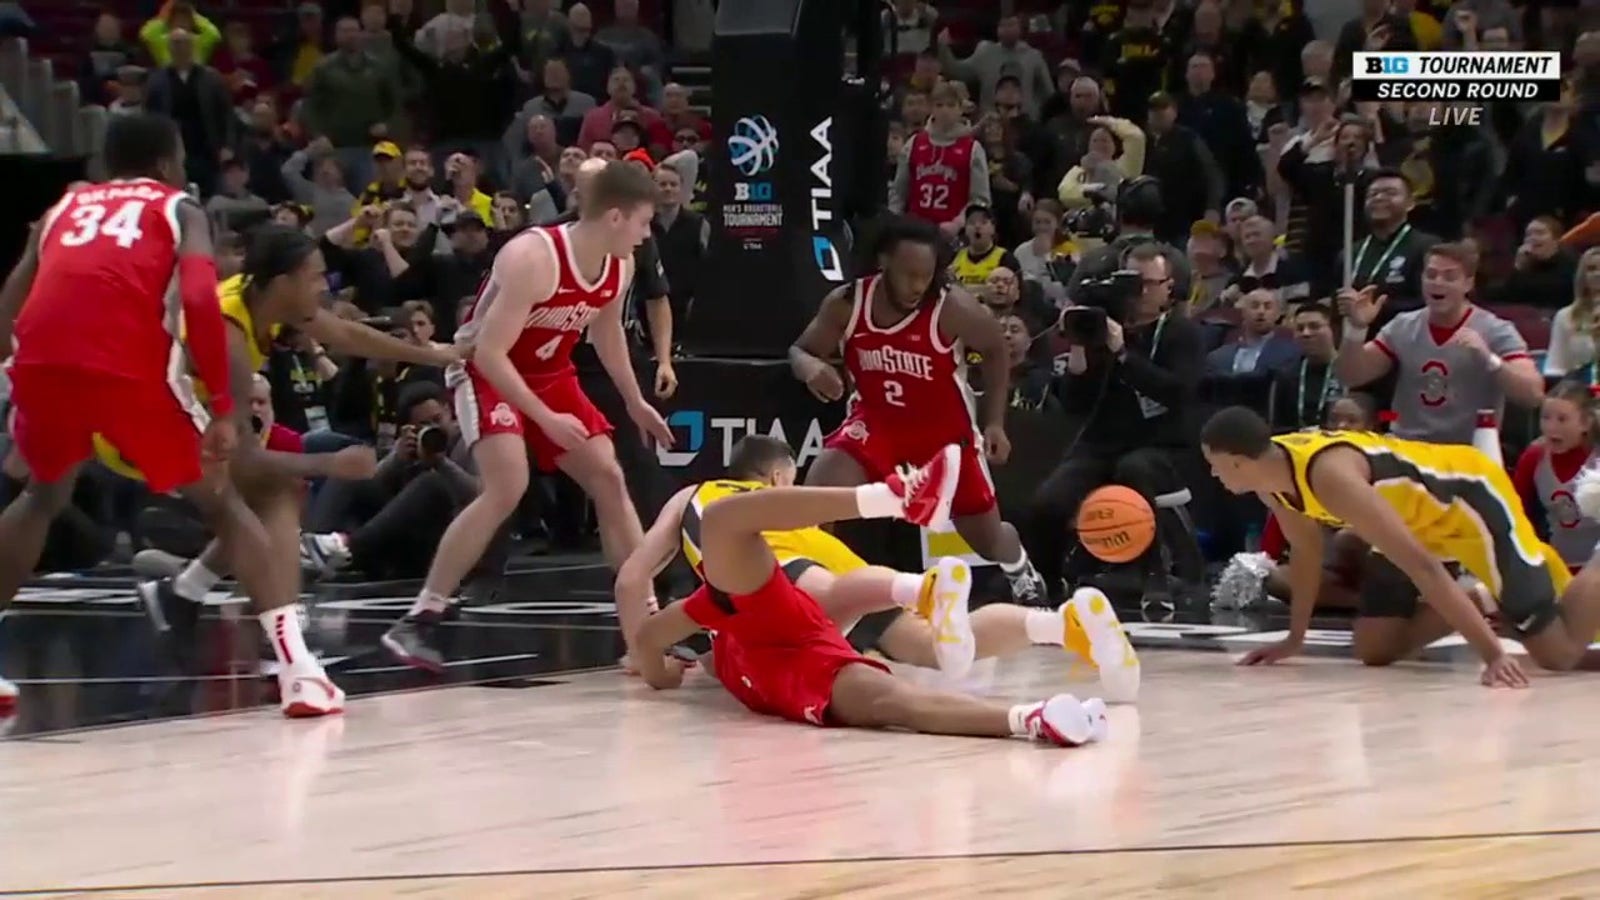 Ohio State, Iowa feature in WILD full-court SCRAMBLE in the Buckeyes' 73-65 victory over the Hawkeyes